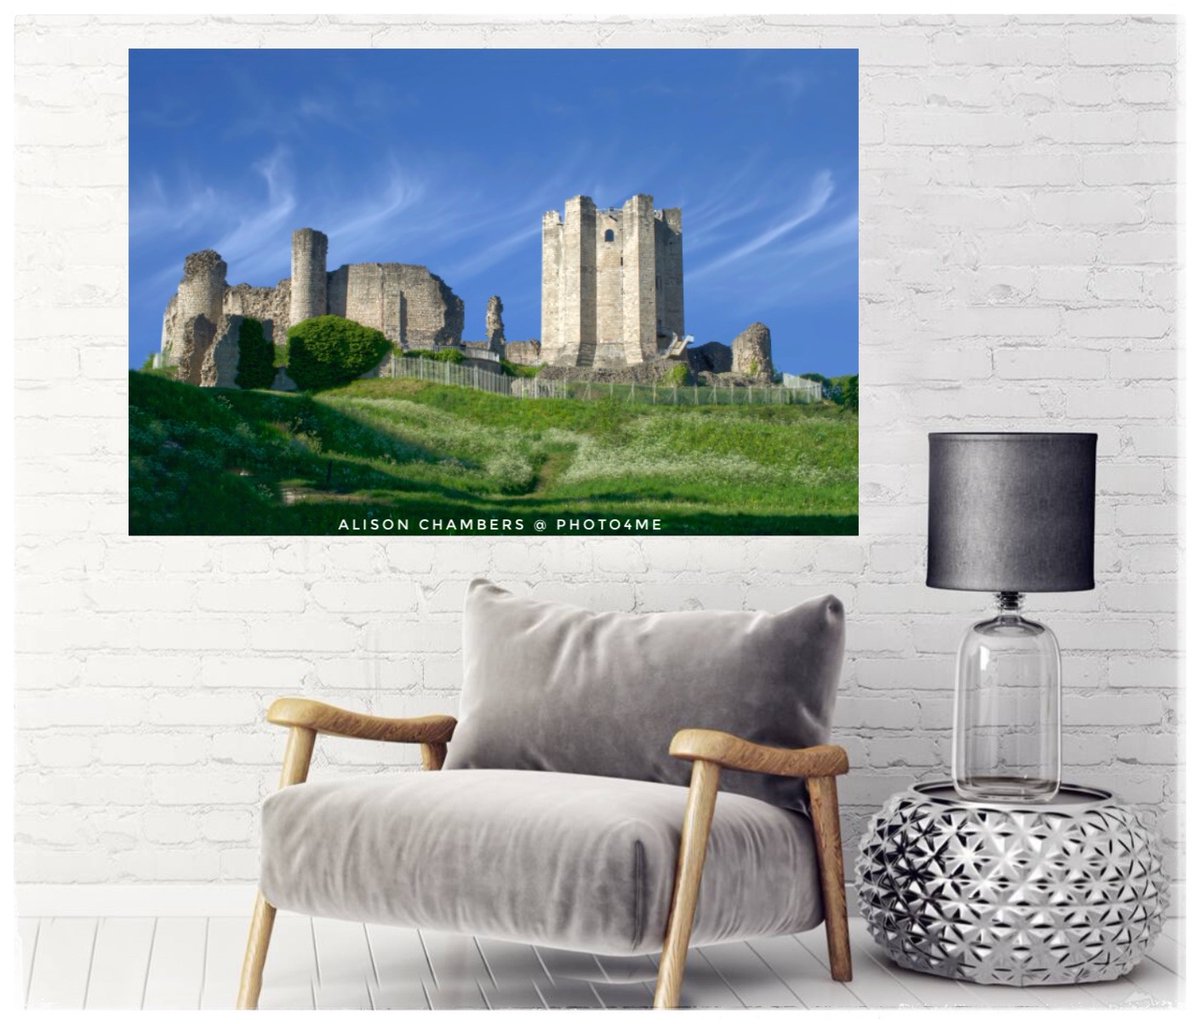 Conisbrough Castle©️. Available from; shop.photo4me.com/1322412 & alisonchambers2.redbubble.com & 2-alison-chambers.pixels.com #conisbroughcastle #conisbrough #conisbroughdoncaster #doncasterisgreat #Doncaster #castle